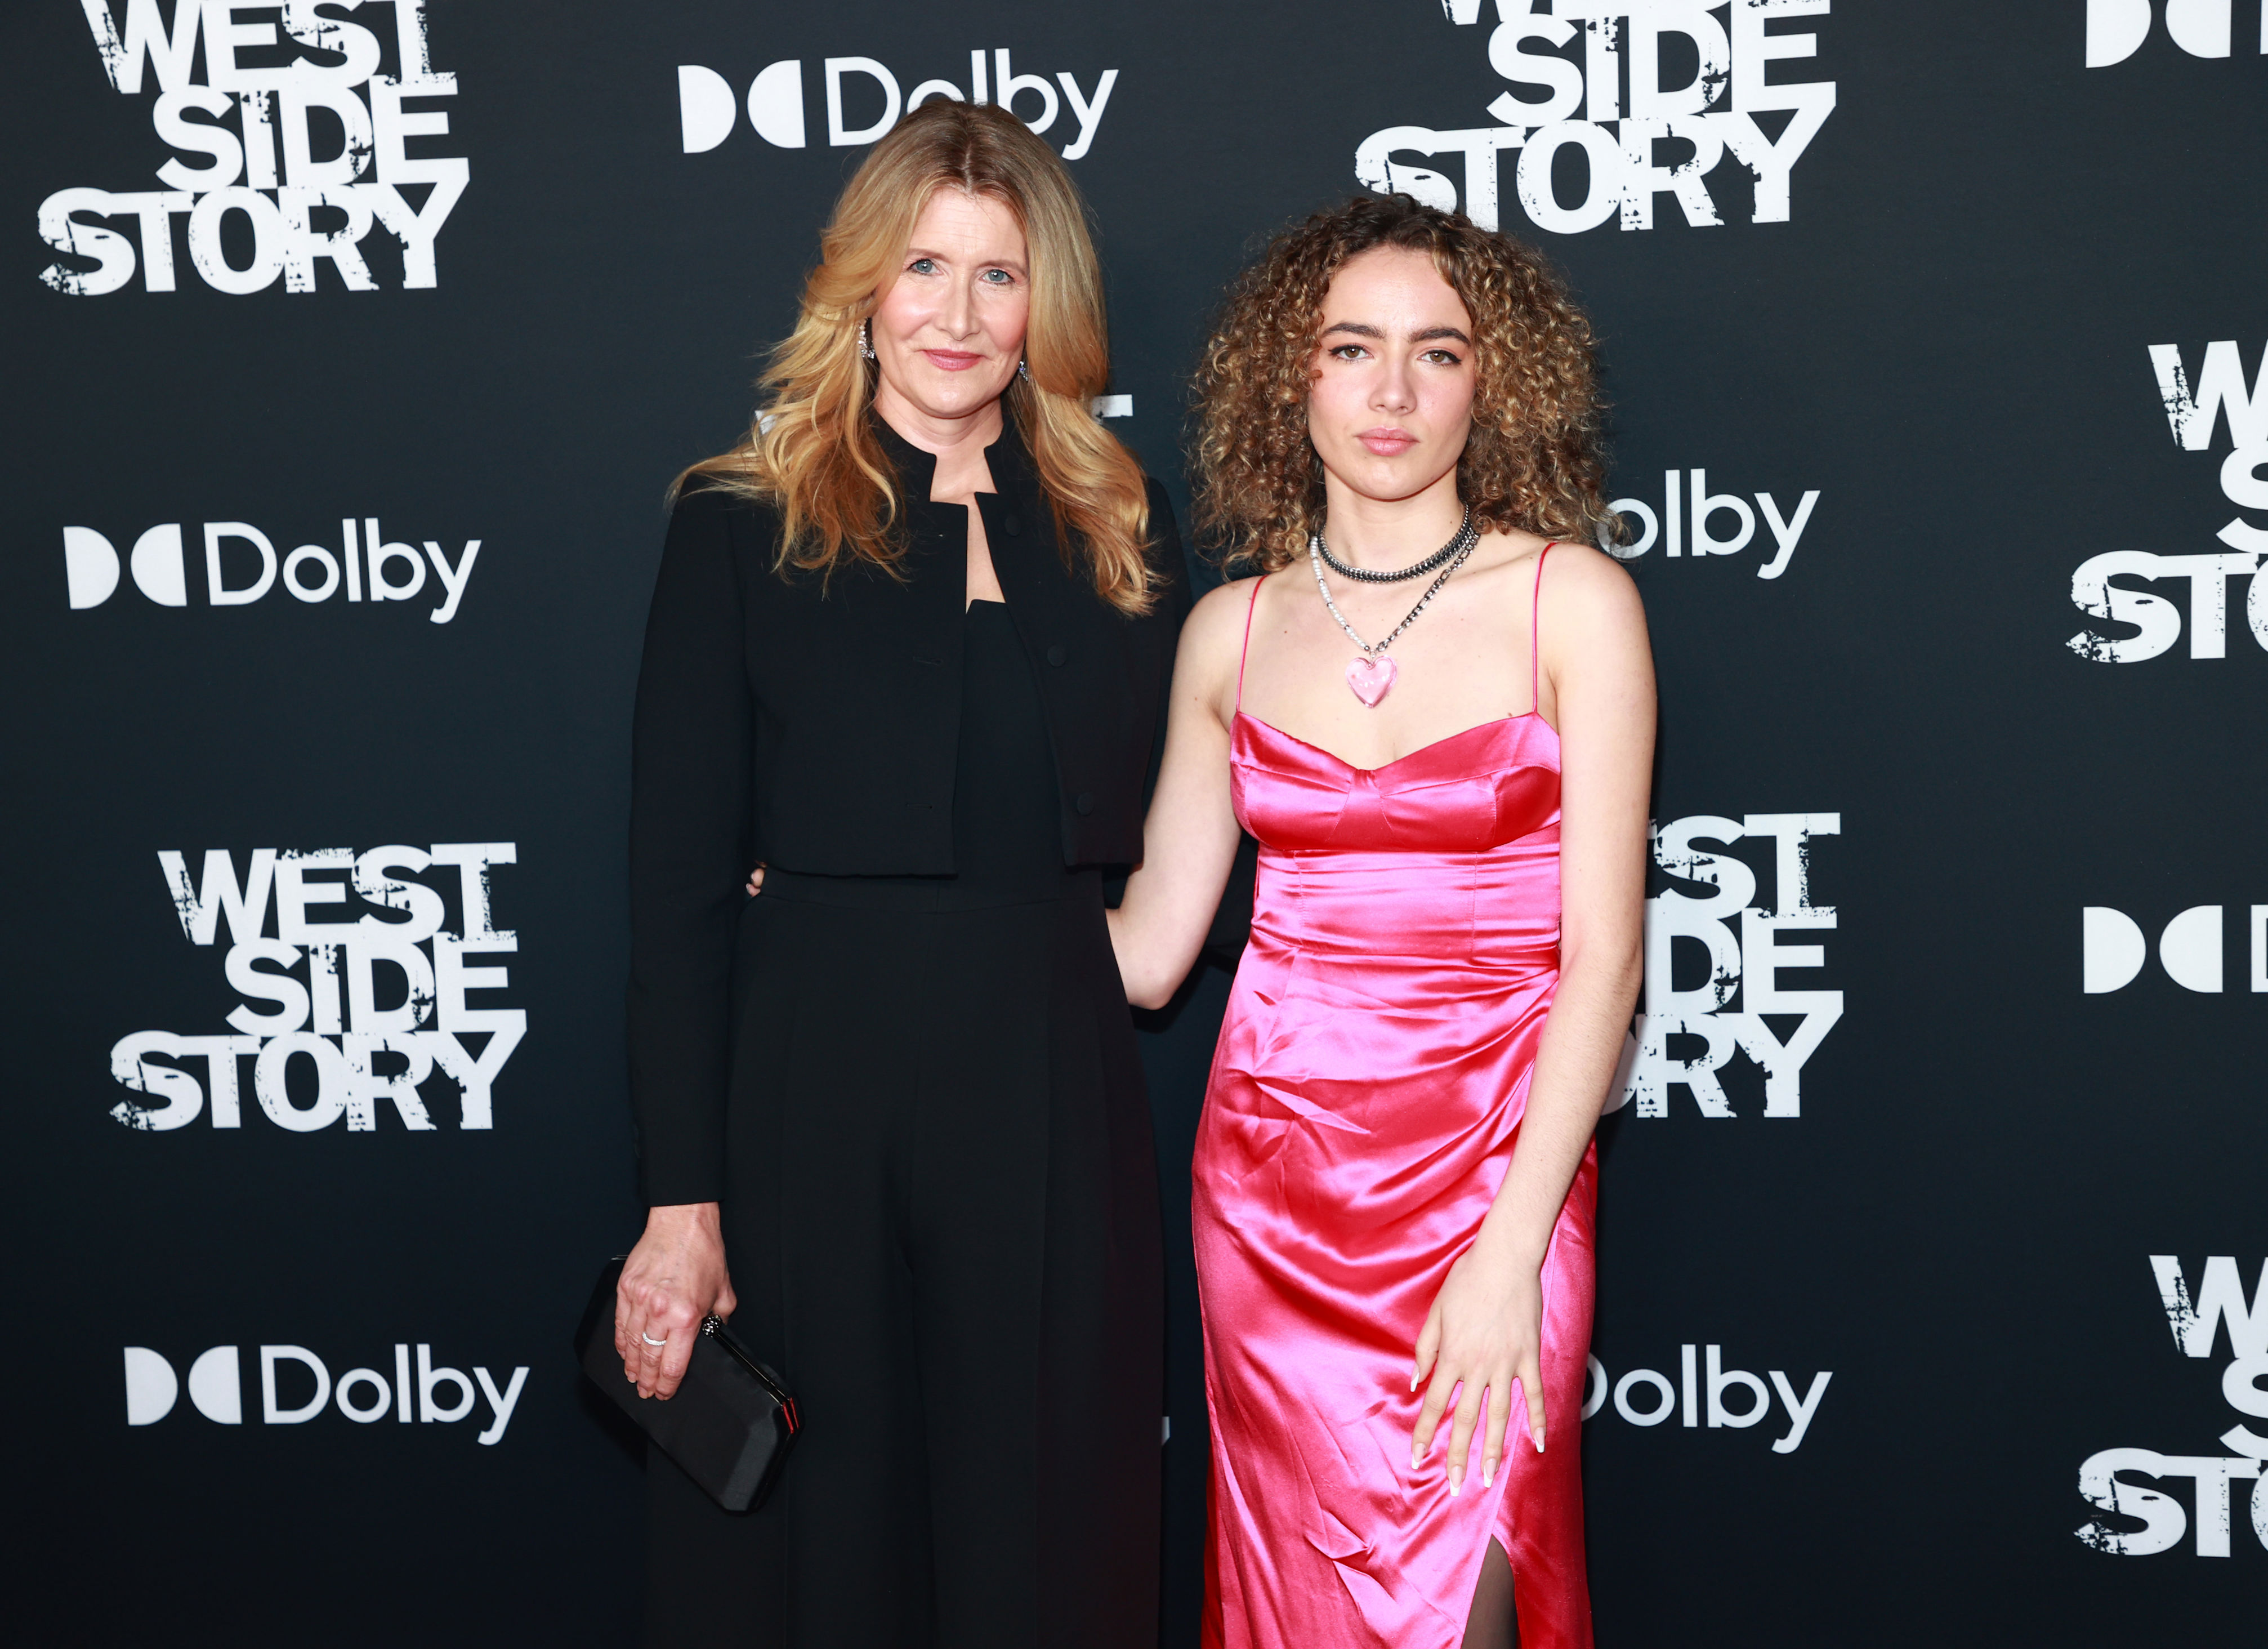 <p>Laura Dern and daughter Jaya Harper (who was born in 2004) attended Disney Studios' premiere of "West Side Story" at the El Capitan Theatre in Hollywood on Dec. 7, 2021.</p>